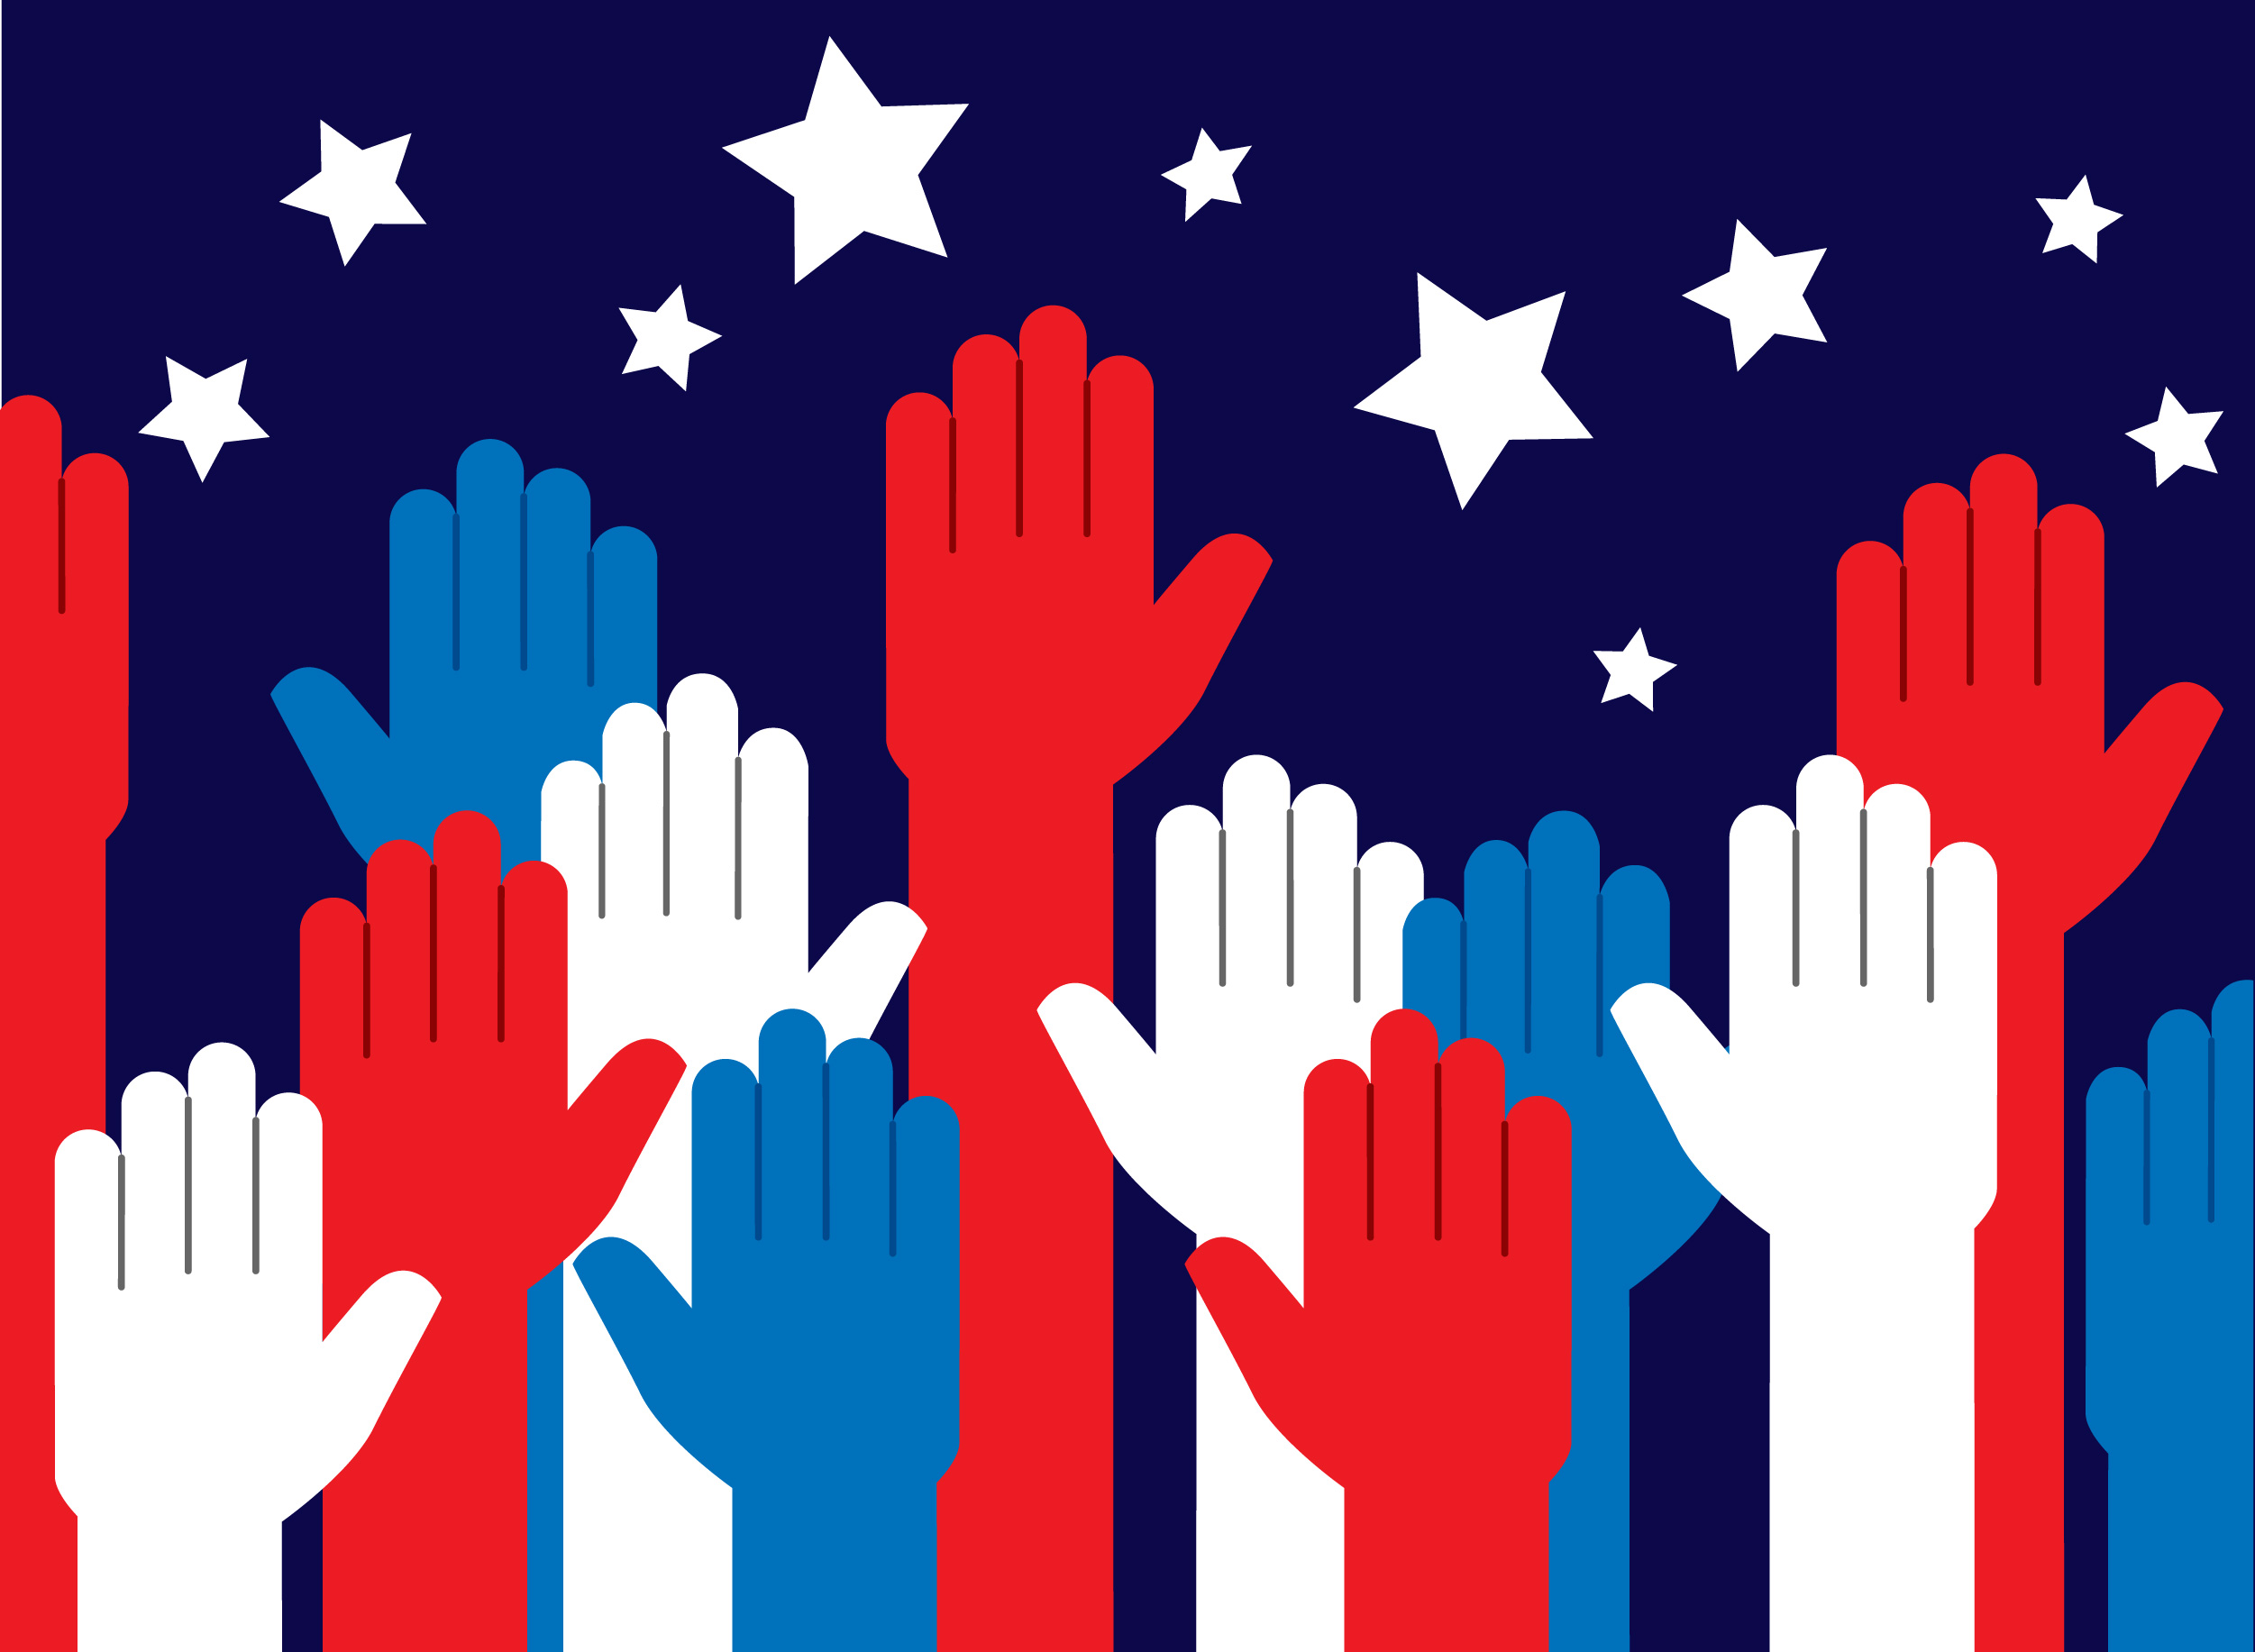 Graphic of red, white, and blue hands raised with stars above the hands.